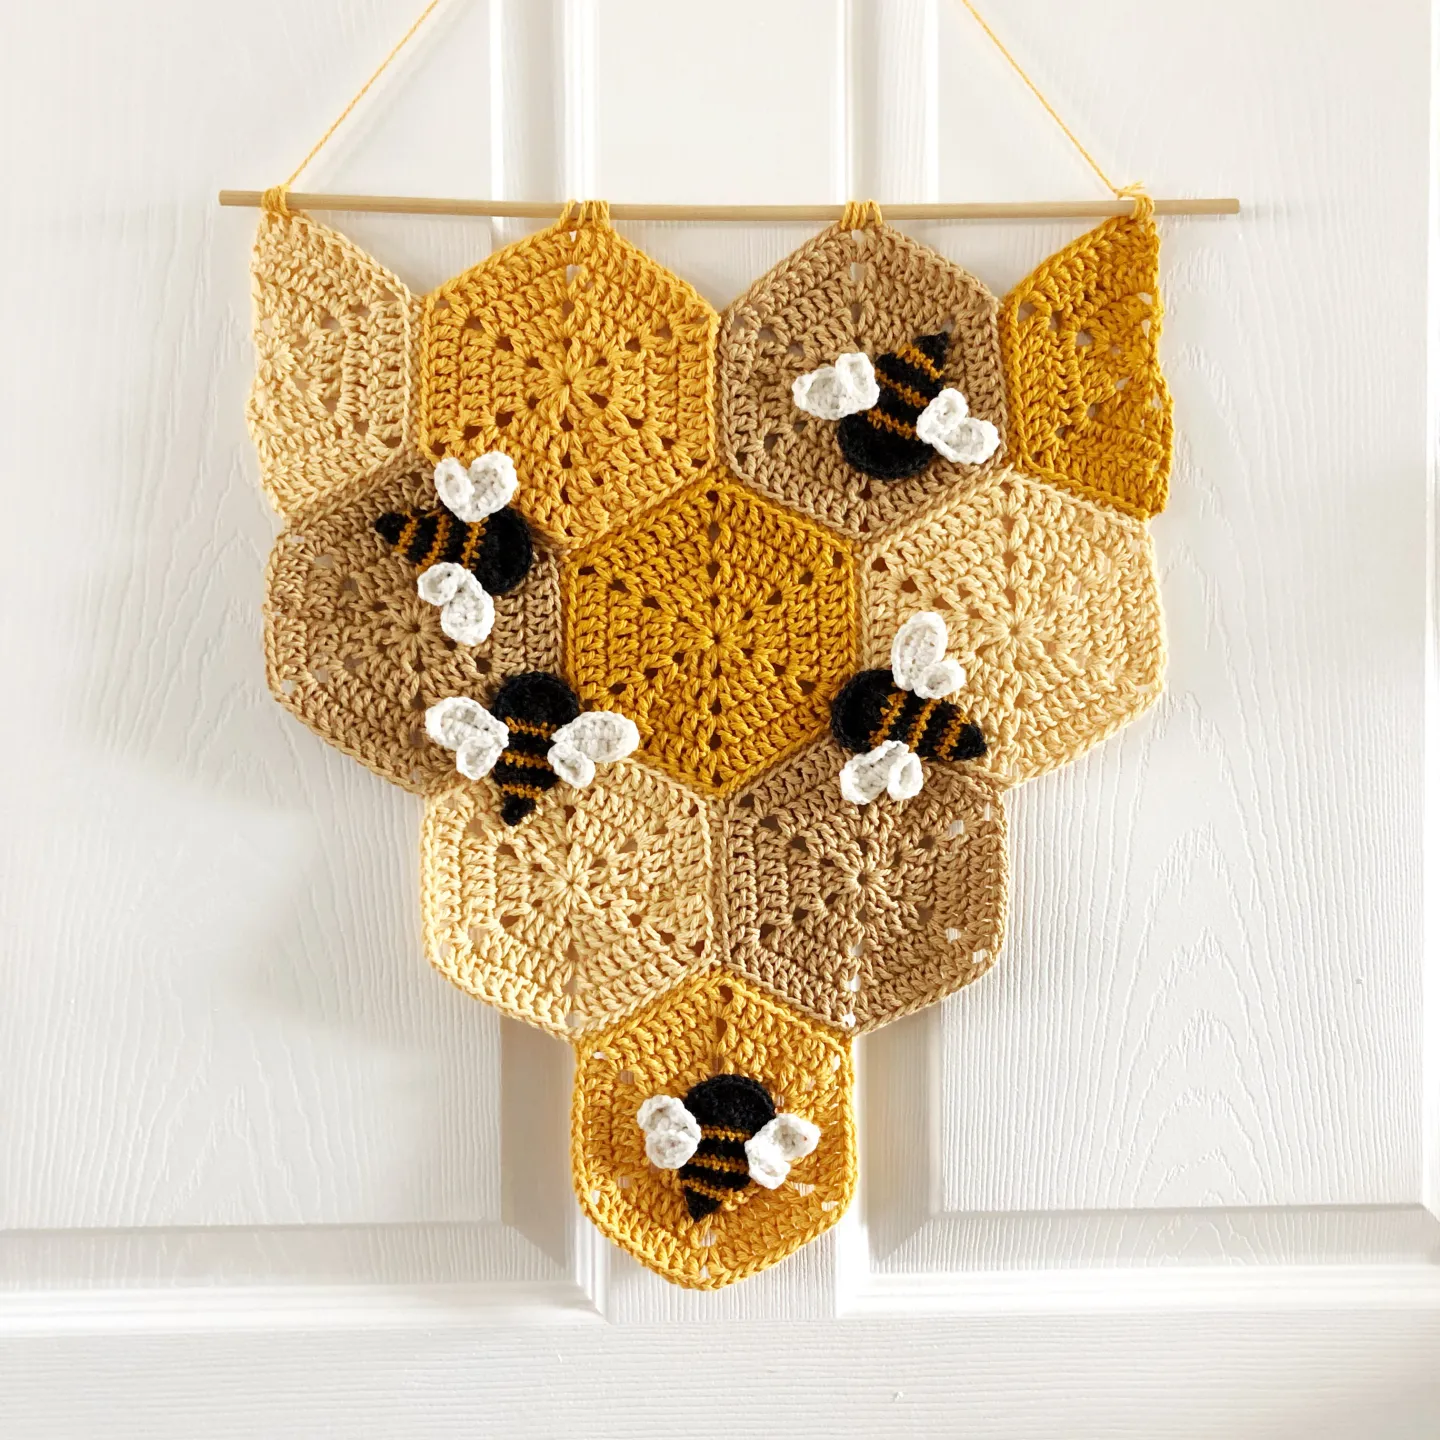 Crochet Hexagon Wall Hanging with bees